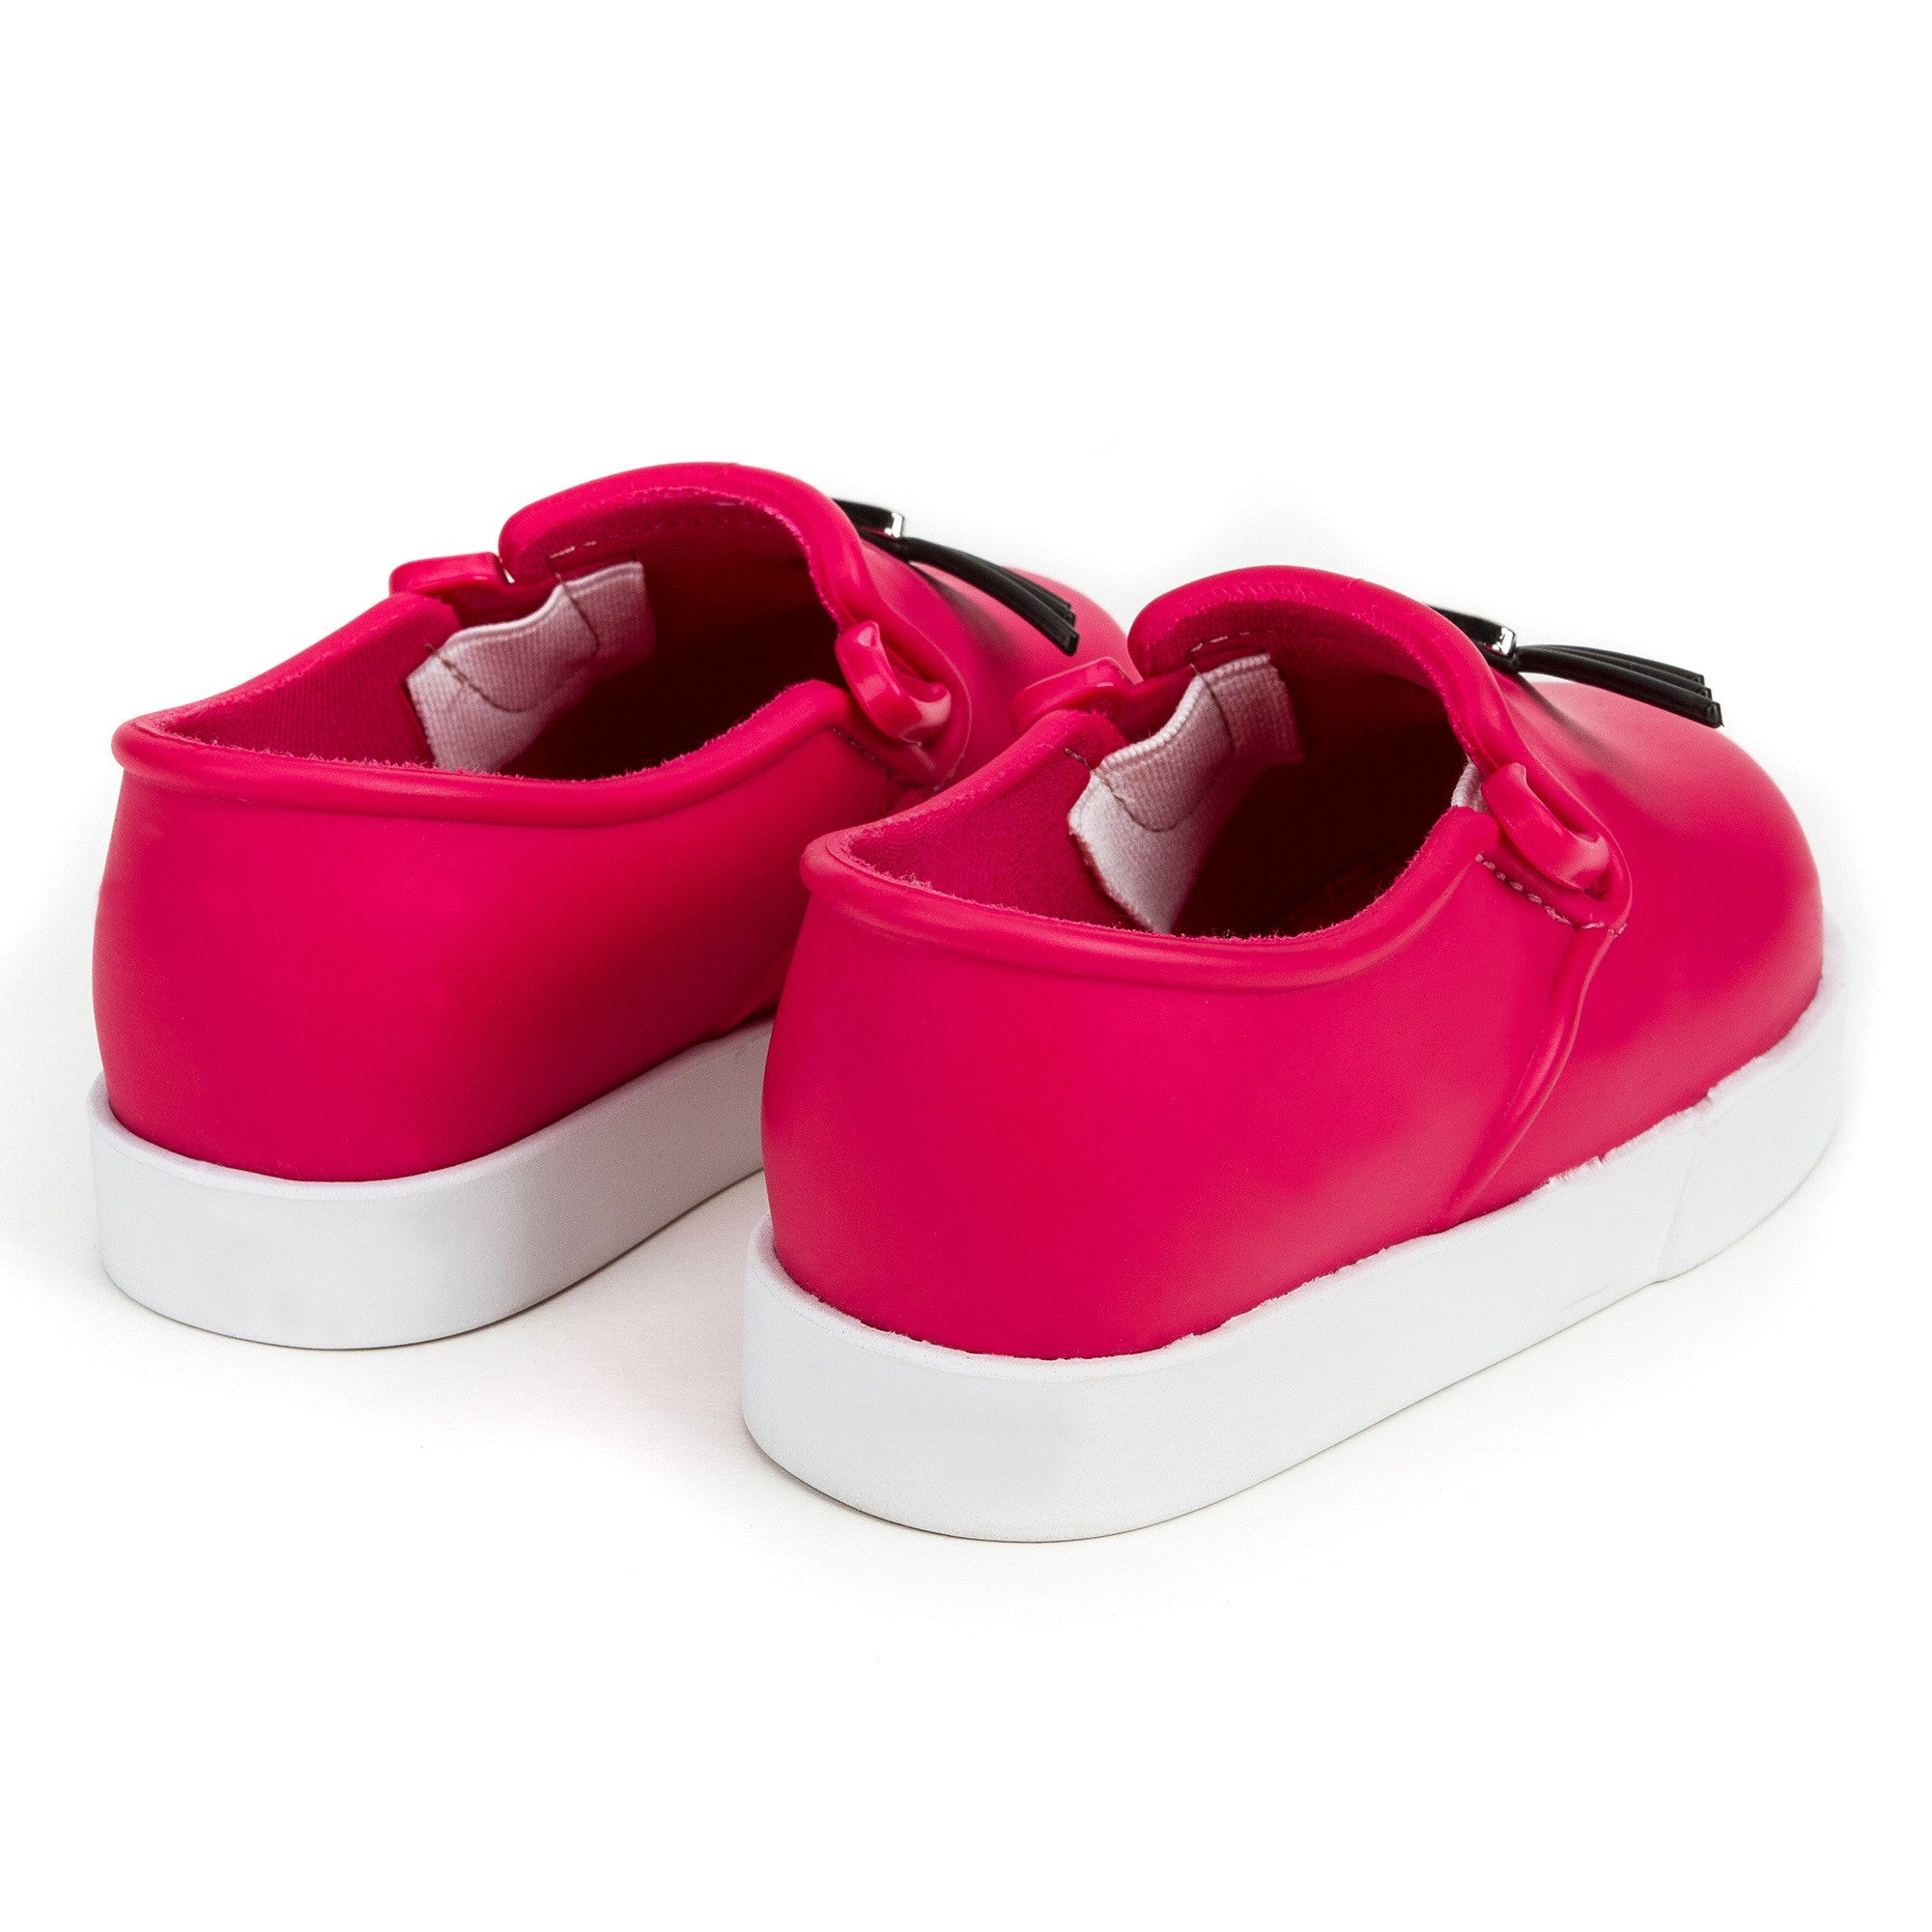 Girls Pink 'Cat' Slip-On Shoes